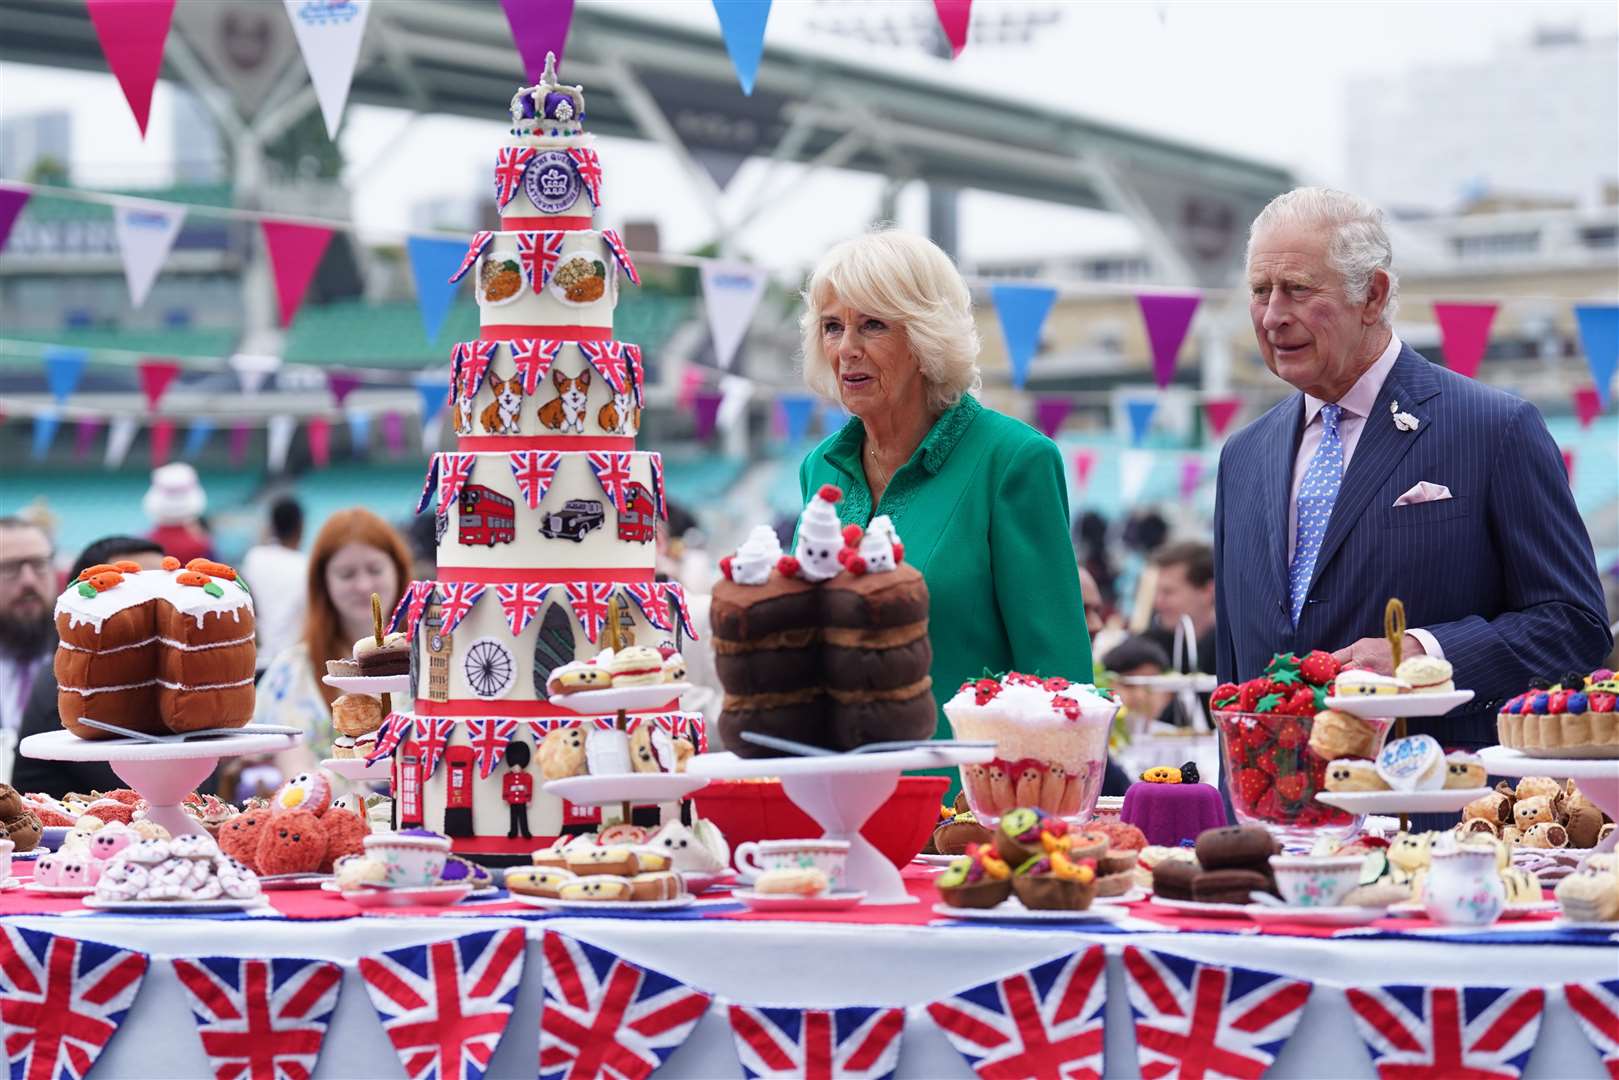 The Prince of Wales and the Duchess of Cornwall attend the Big Jubilee Lunch with tables set up on the pitch at The Oval cricket ground (Stefan Rousseau/PA)